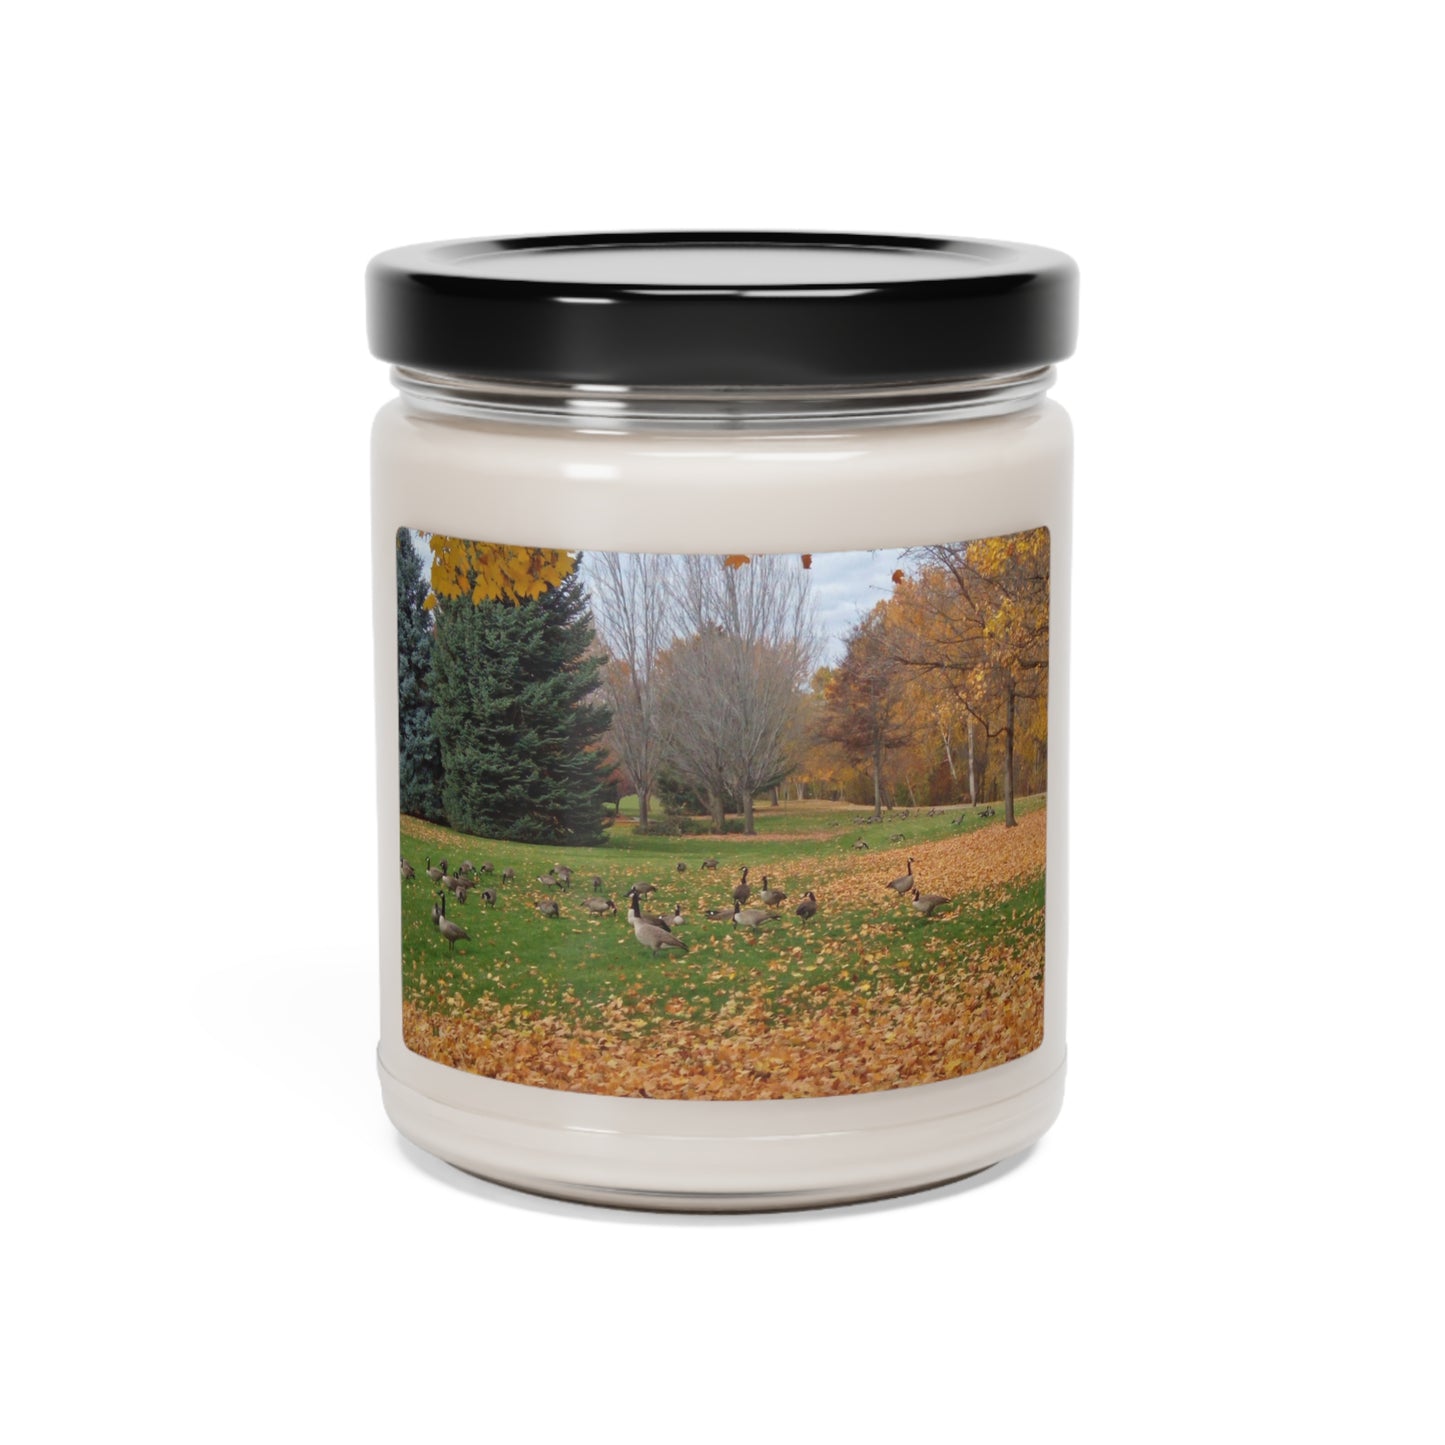 Autumn Geese Scented Soy Candle, 9oz